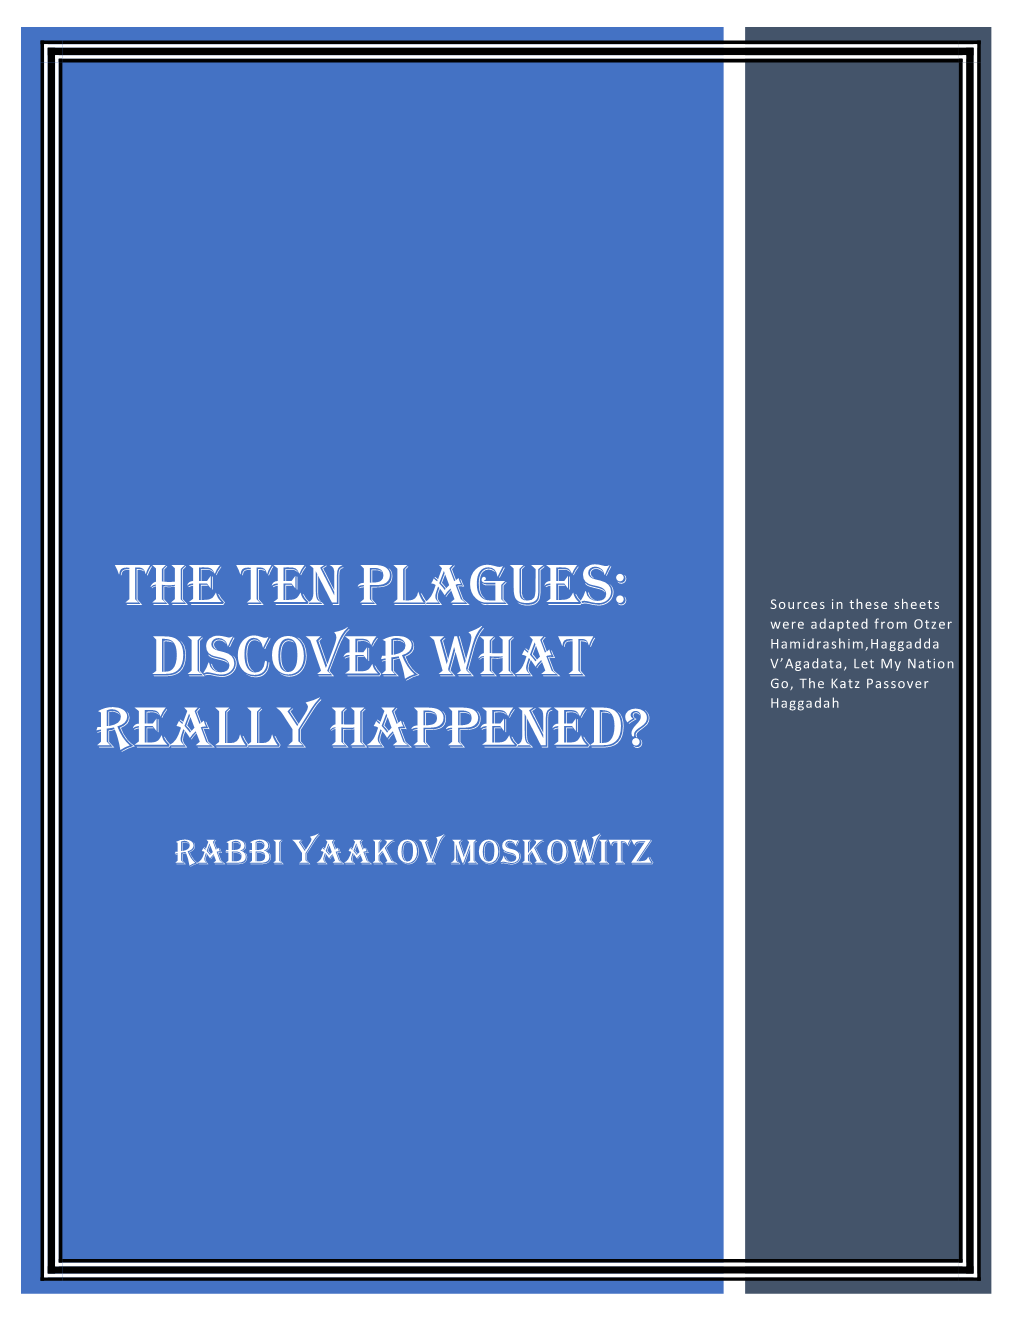 The Ten Plagues: Discover What Really Happened?